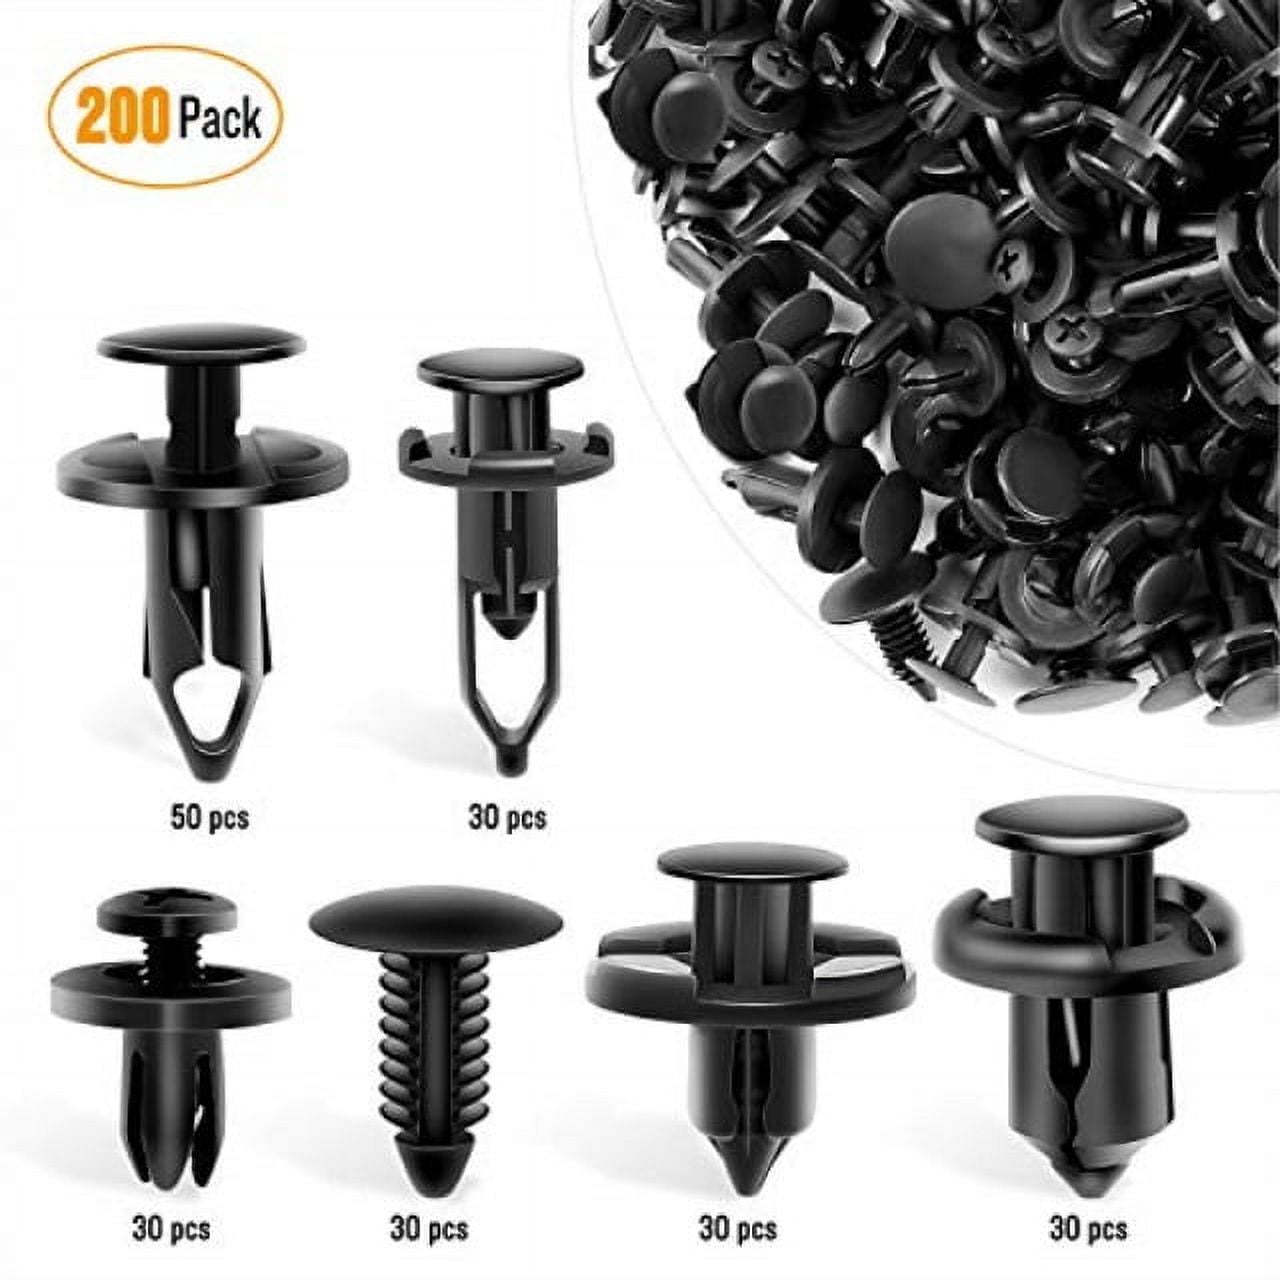 gooacc universal plastic fender clips,200 pcs push bumper fastener rivet  clips with 6 size auto body retainer clips bumpers,car fender replacement  for gm, ford & ch 